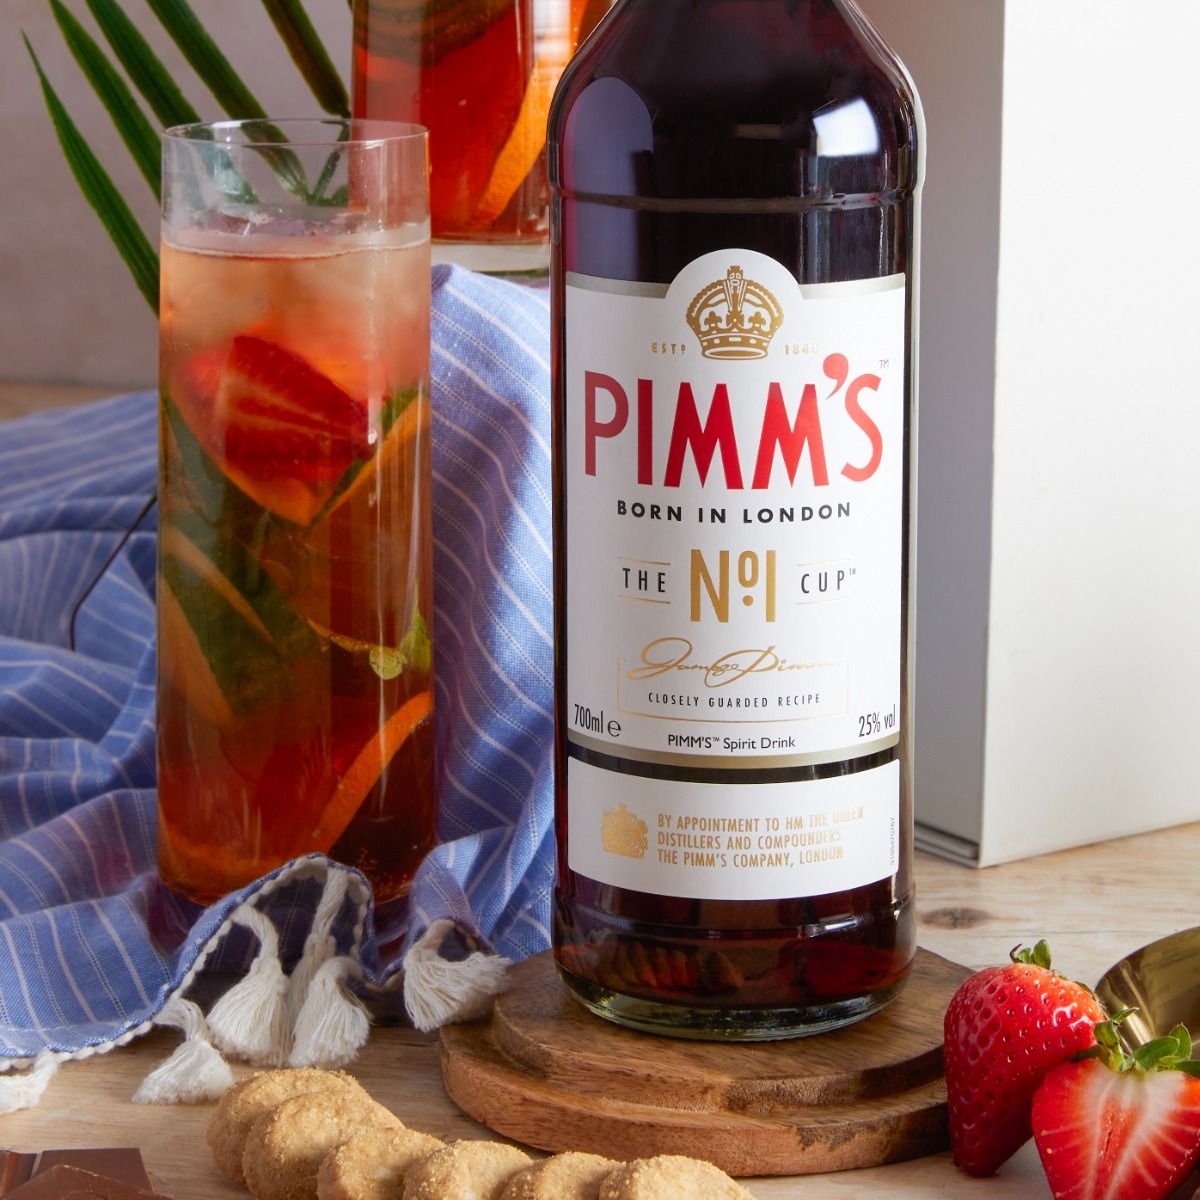 close up of Pimm's bottle and glass, in the British Pimm's Summer Hamper